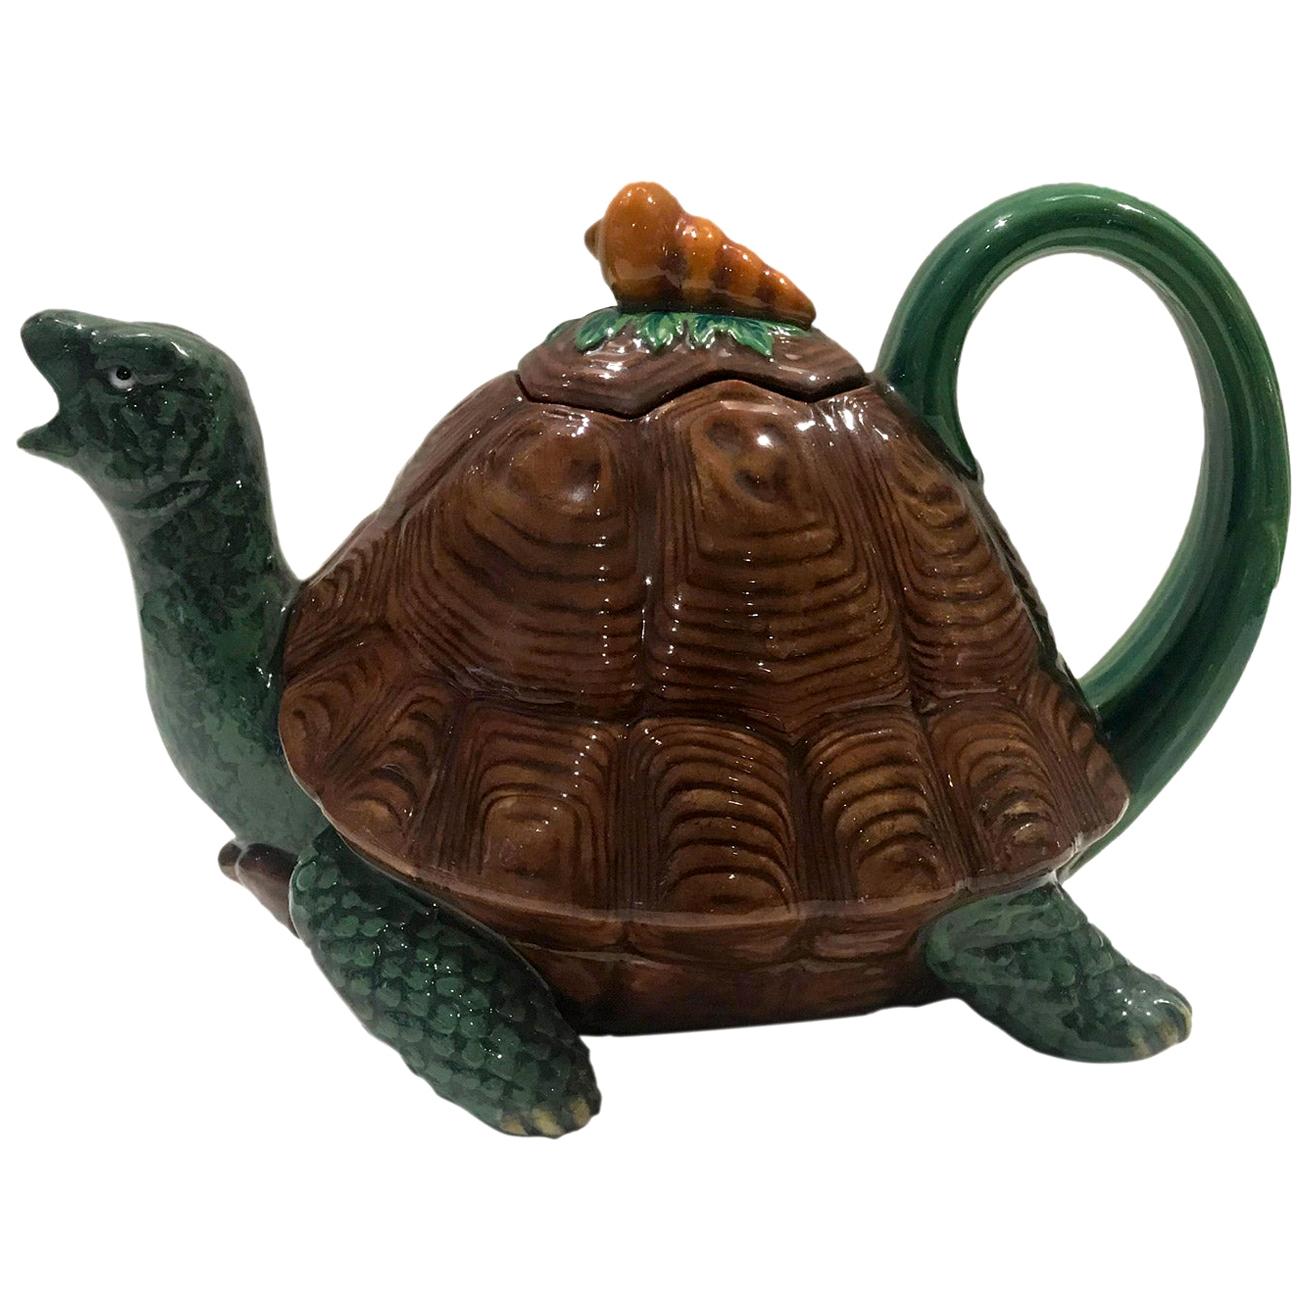 Minton Majolica Tortoise Teapot limited edition signed